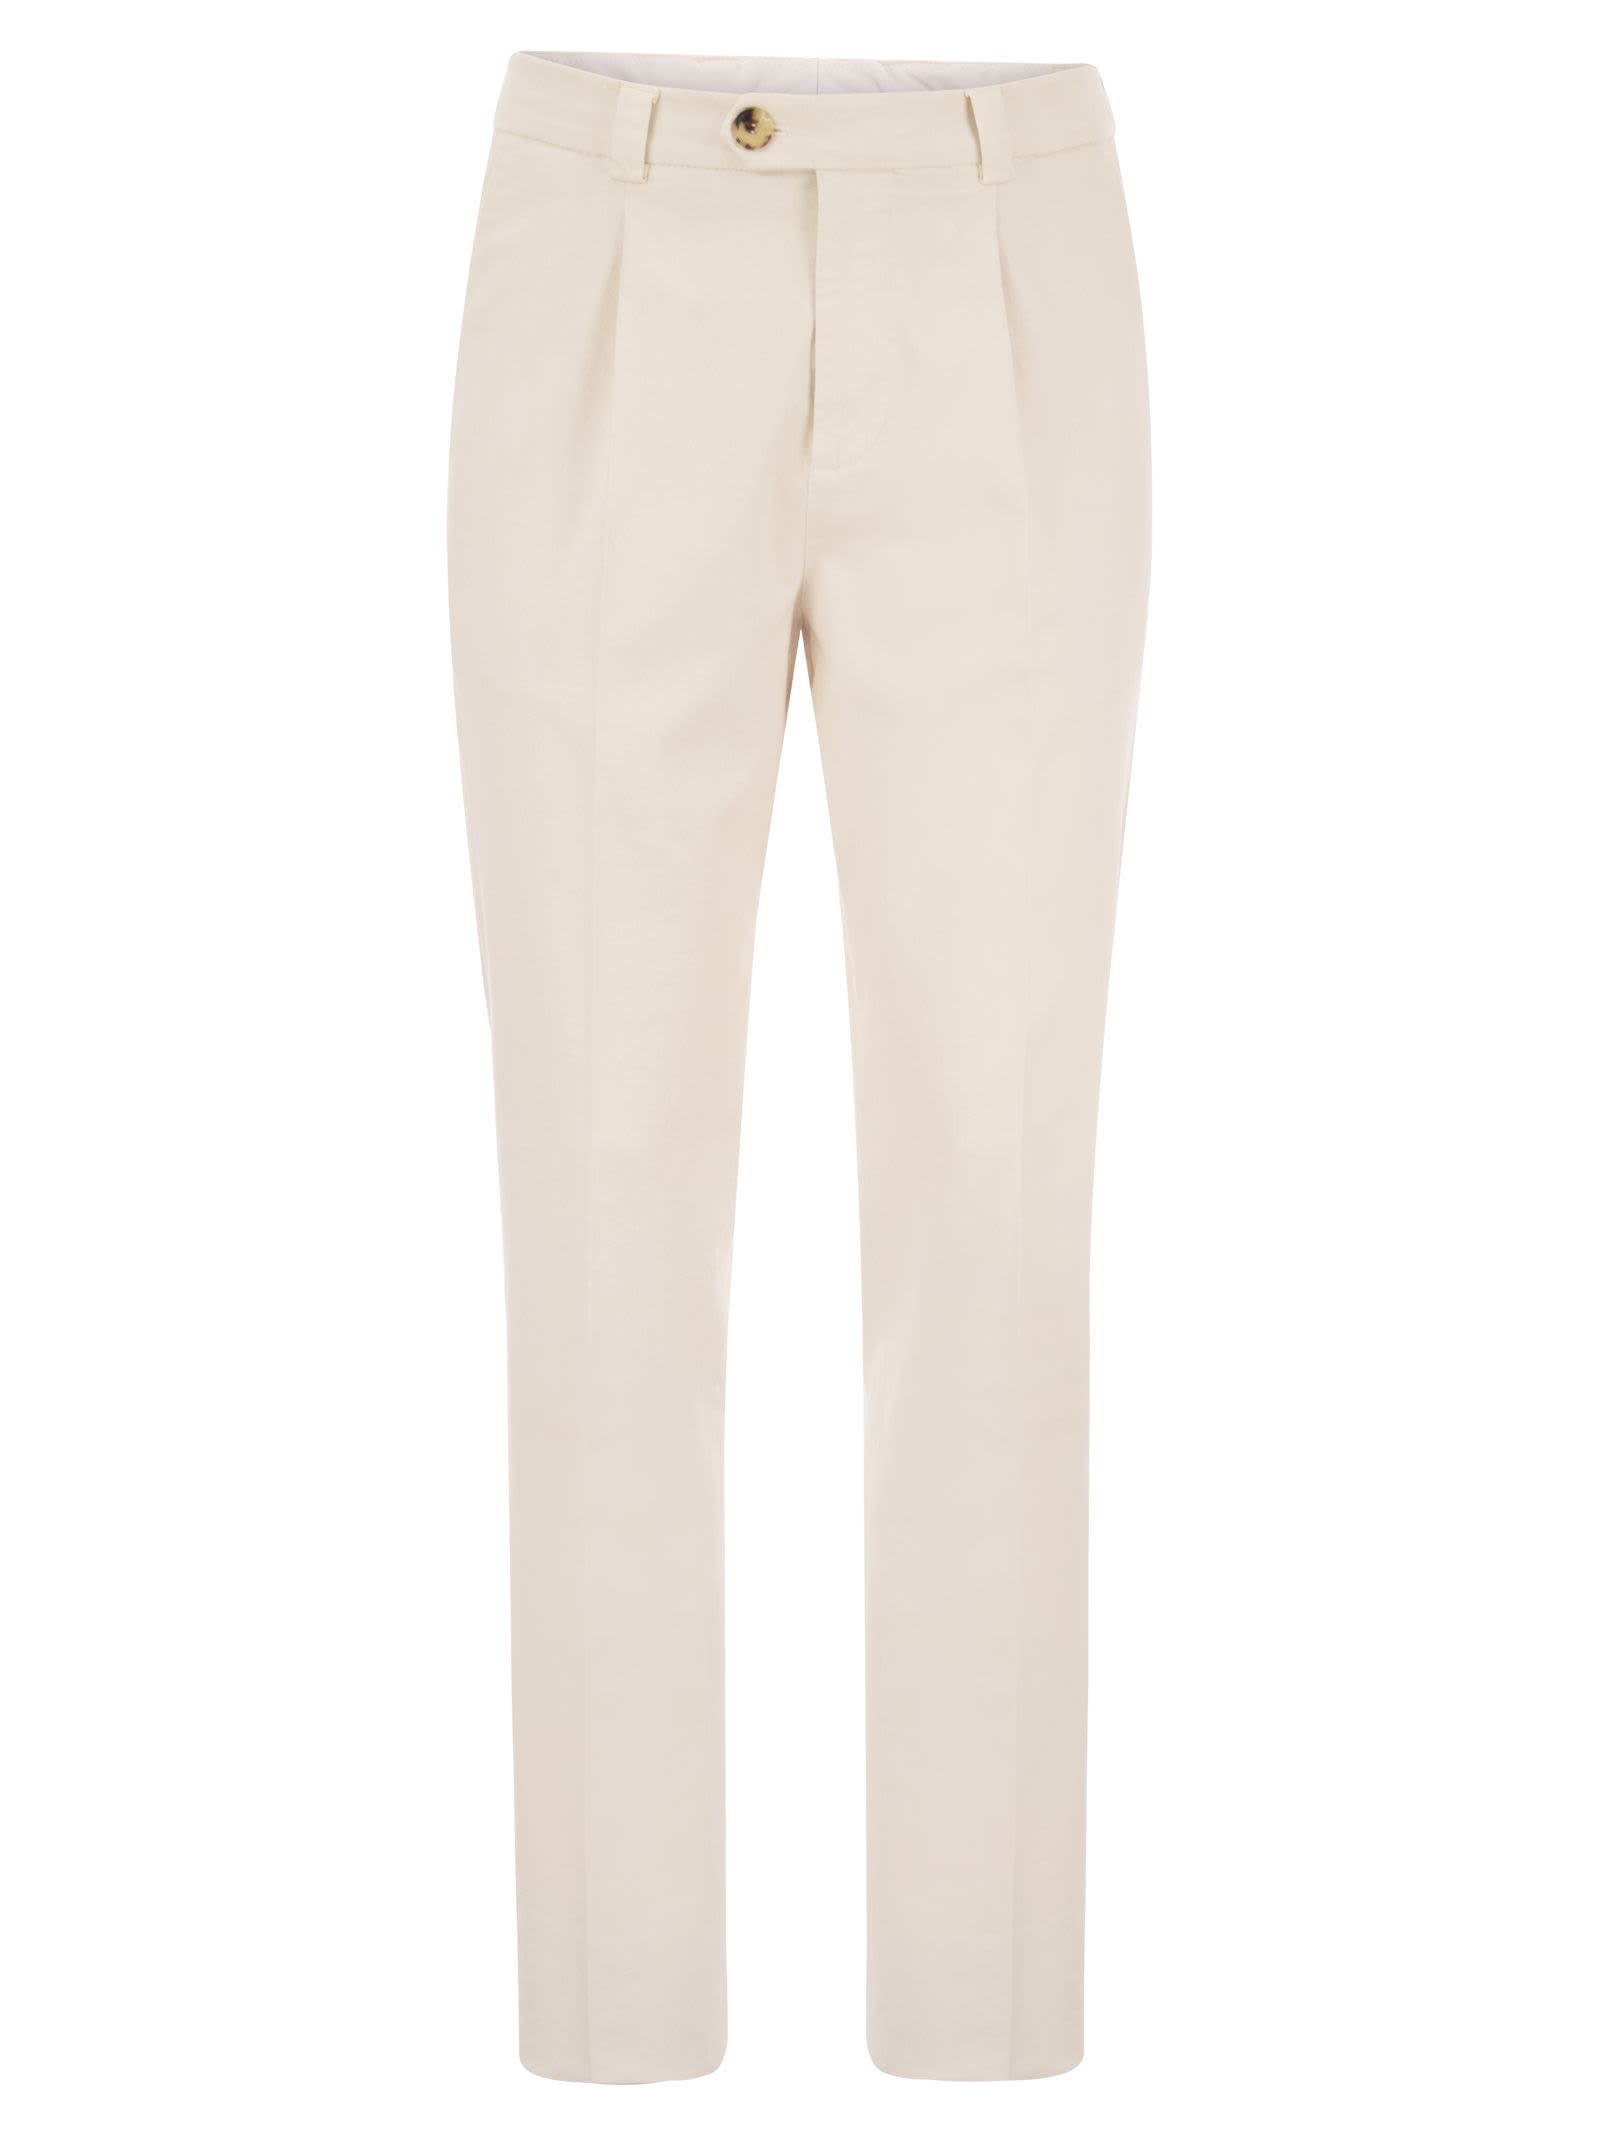 BRUNELLO CUCINELLI COTTON-BLEND TROUSERS WITH DARTS